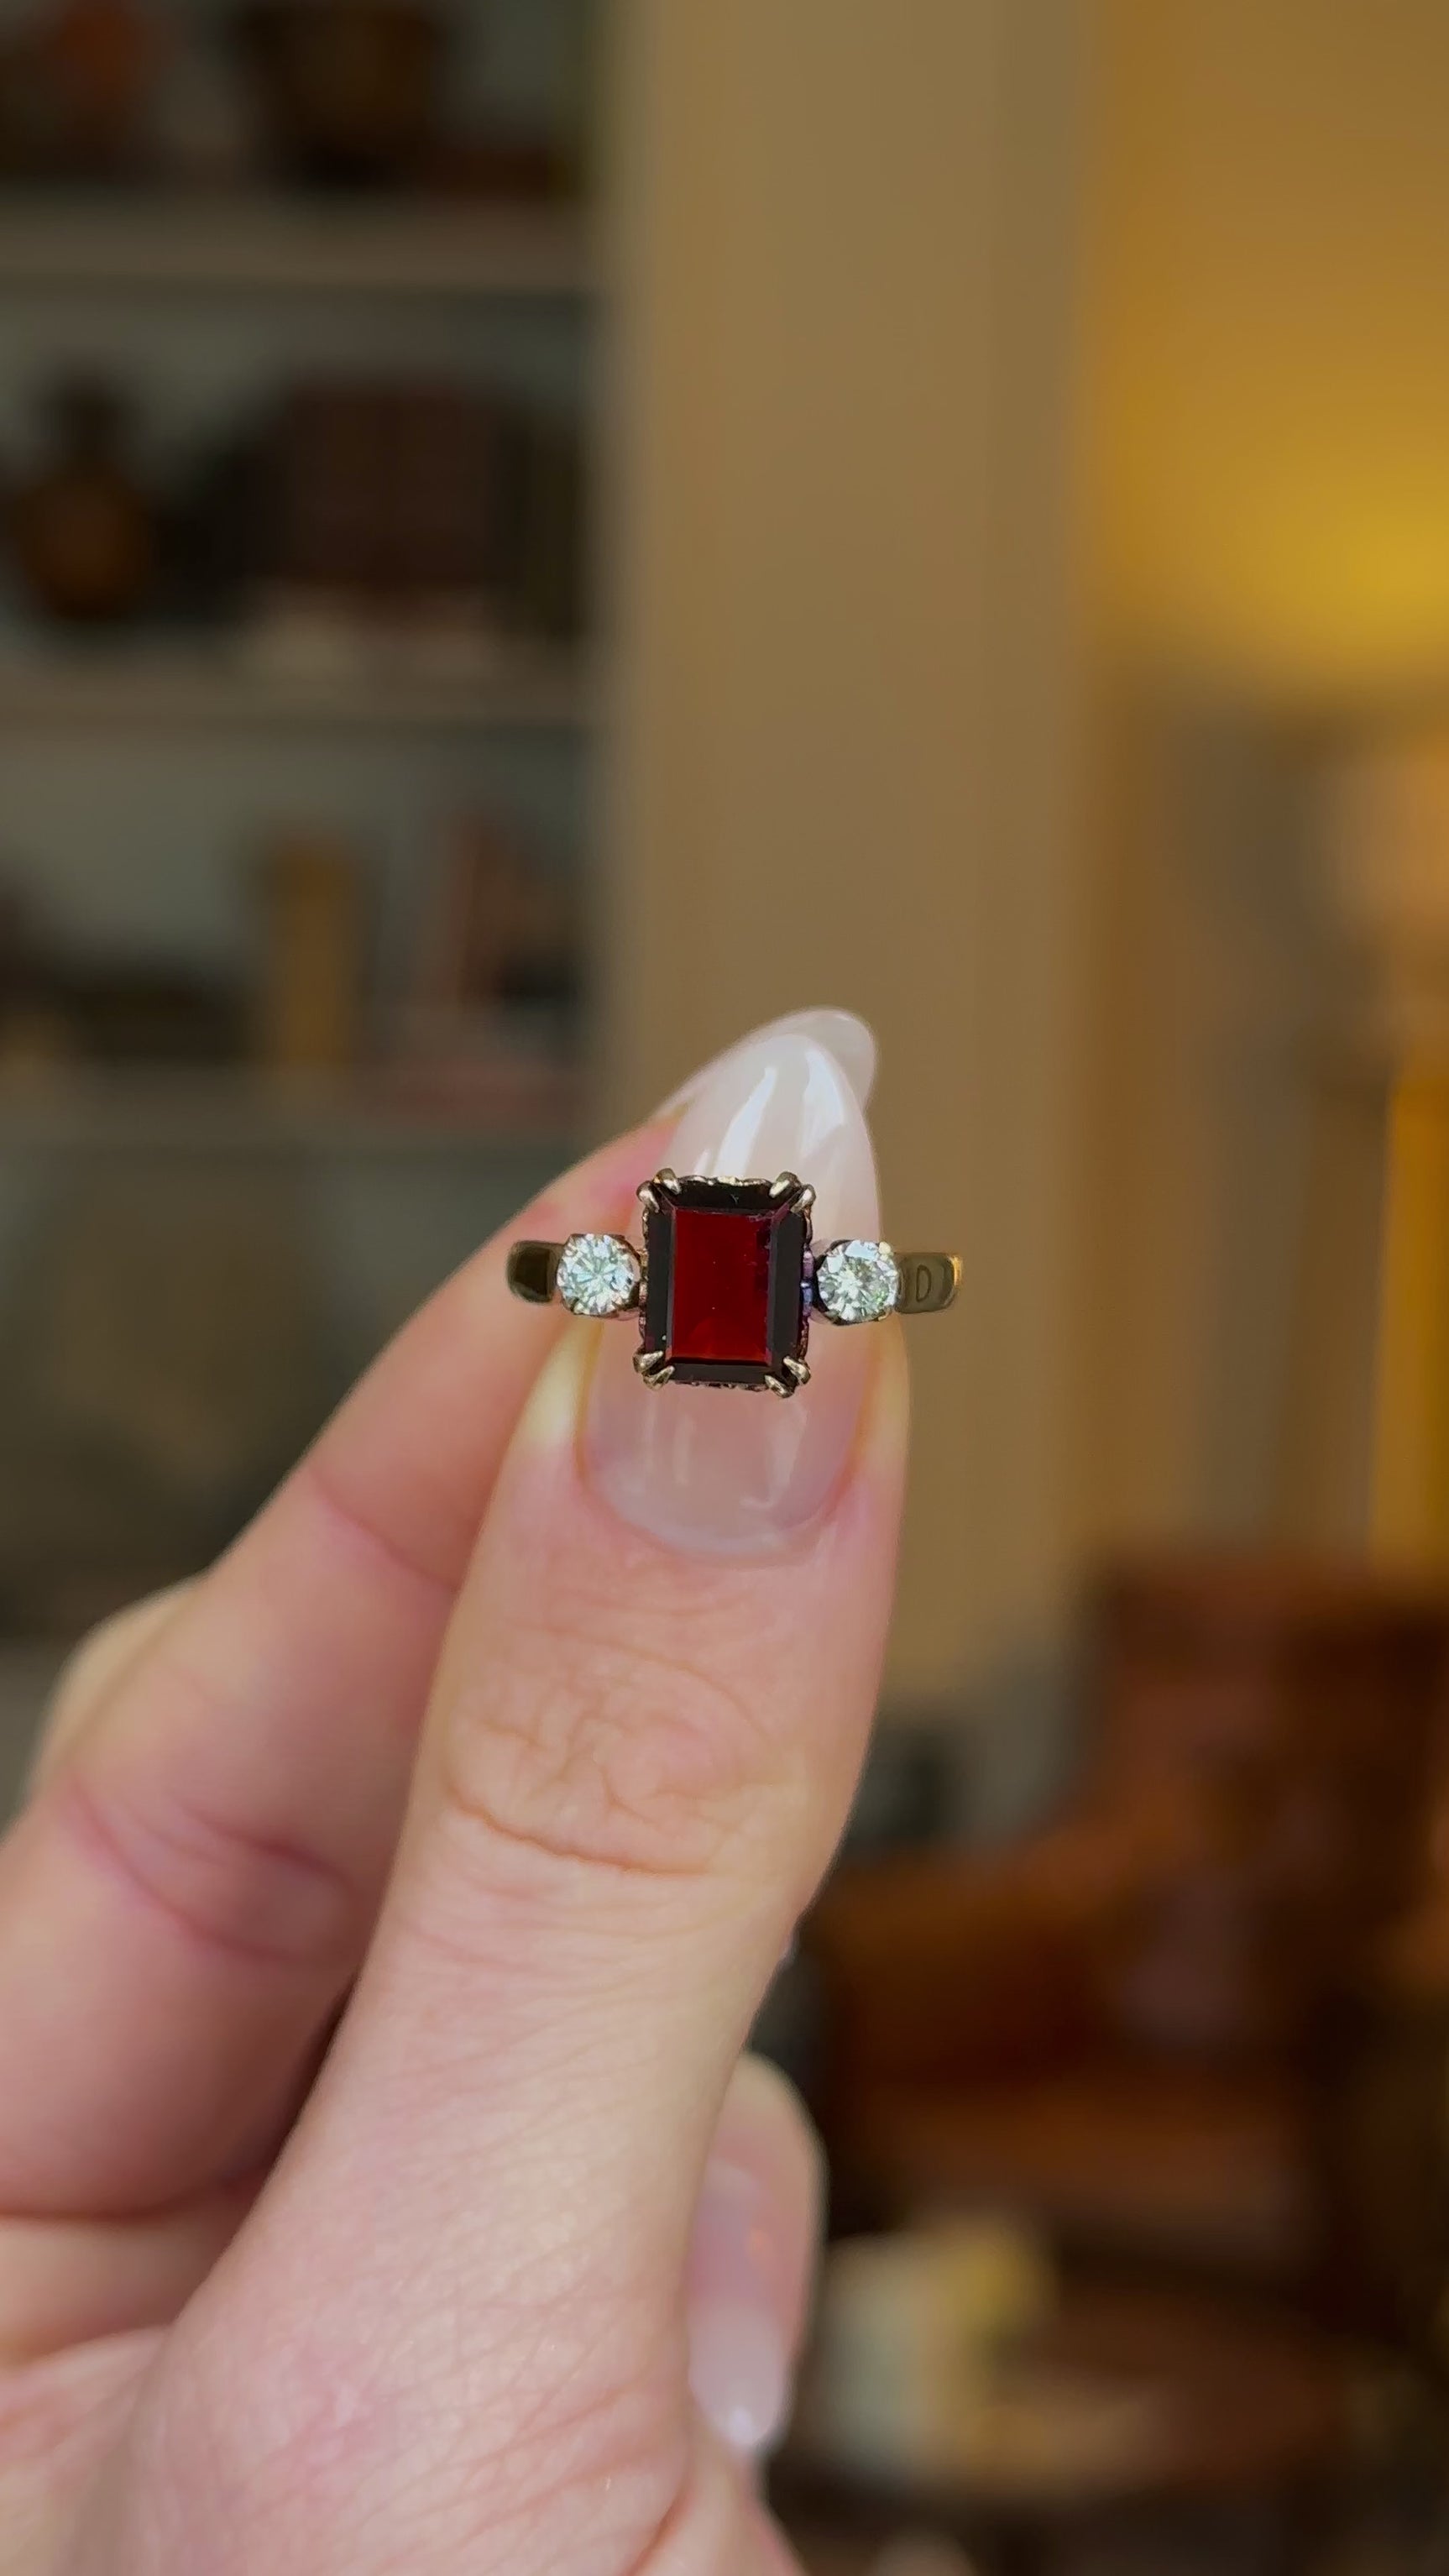 Vintage, 1940s Three-Stone Garnet and Diamond Ring, 18ct Rosy Yellow Gold held in fingers and rotated to give perspective.